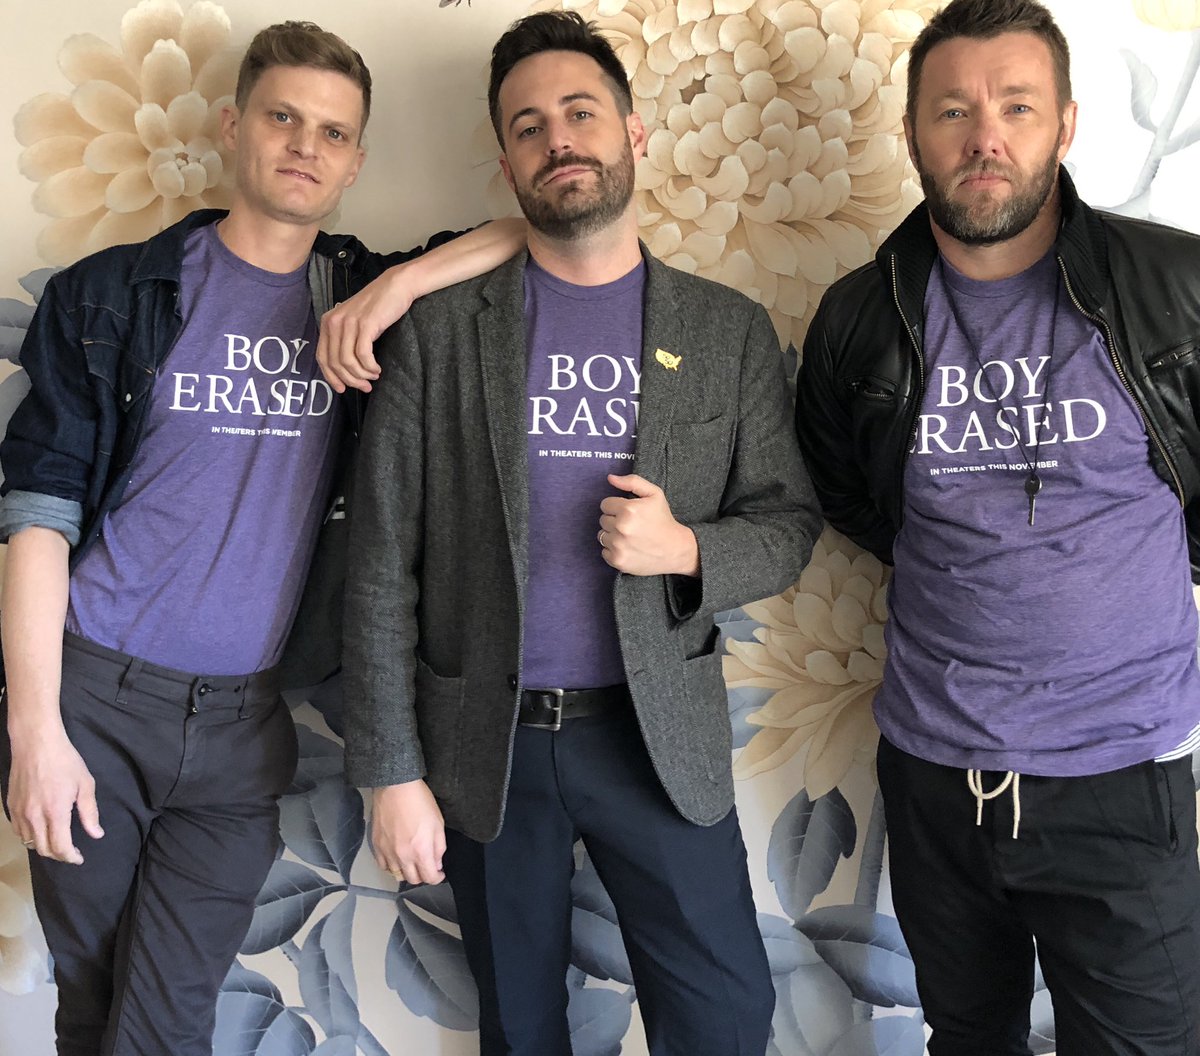 Happy #SpiritDay from the #BoyErased team. We stand with @glaad and #LGBTQ youth against bullying. #ChooseKindness